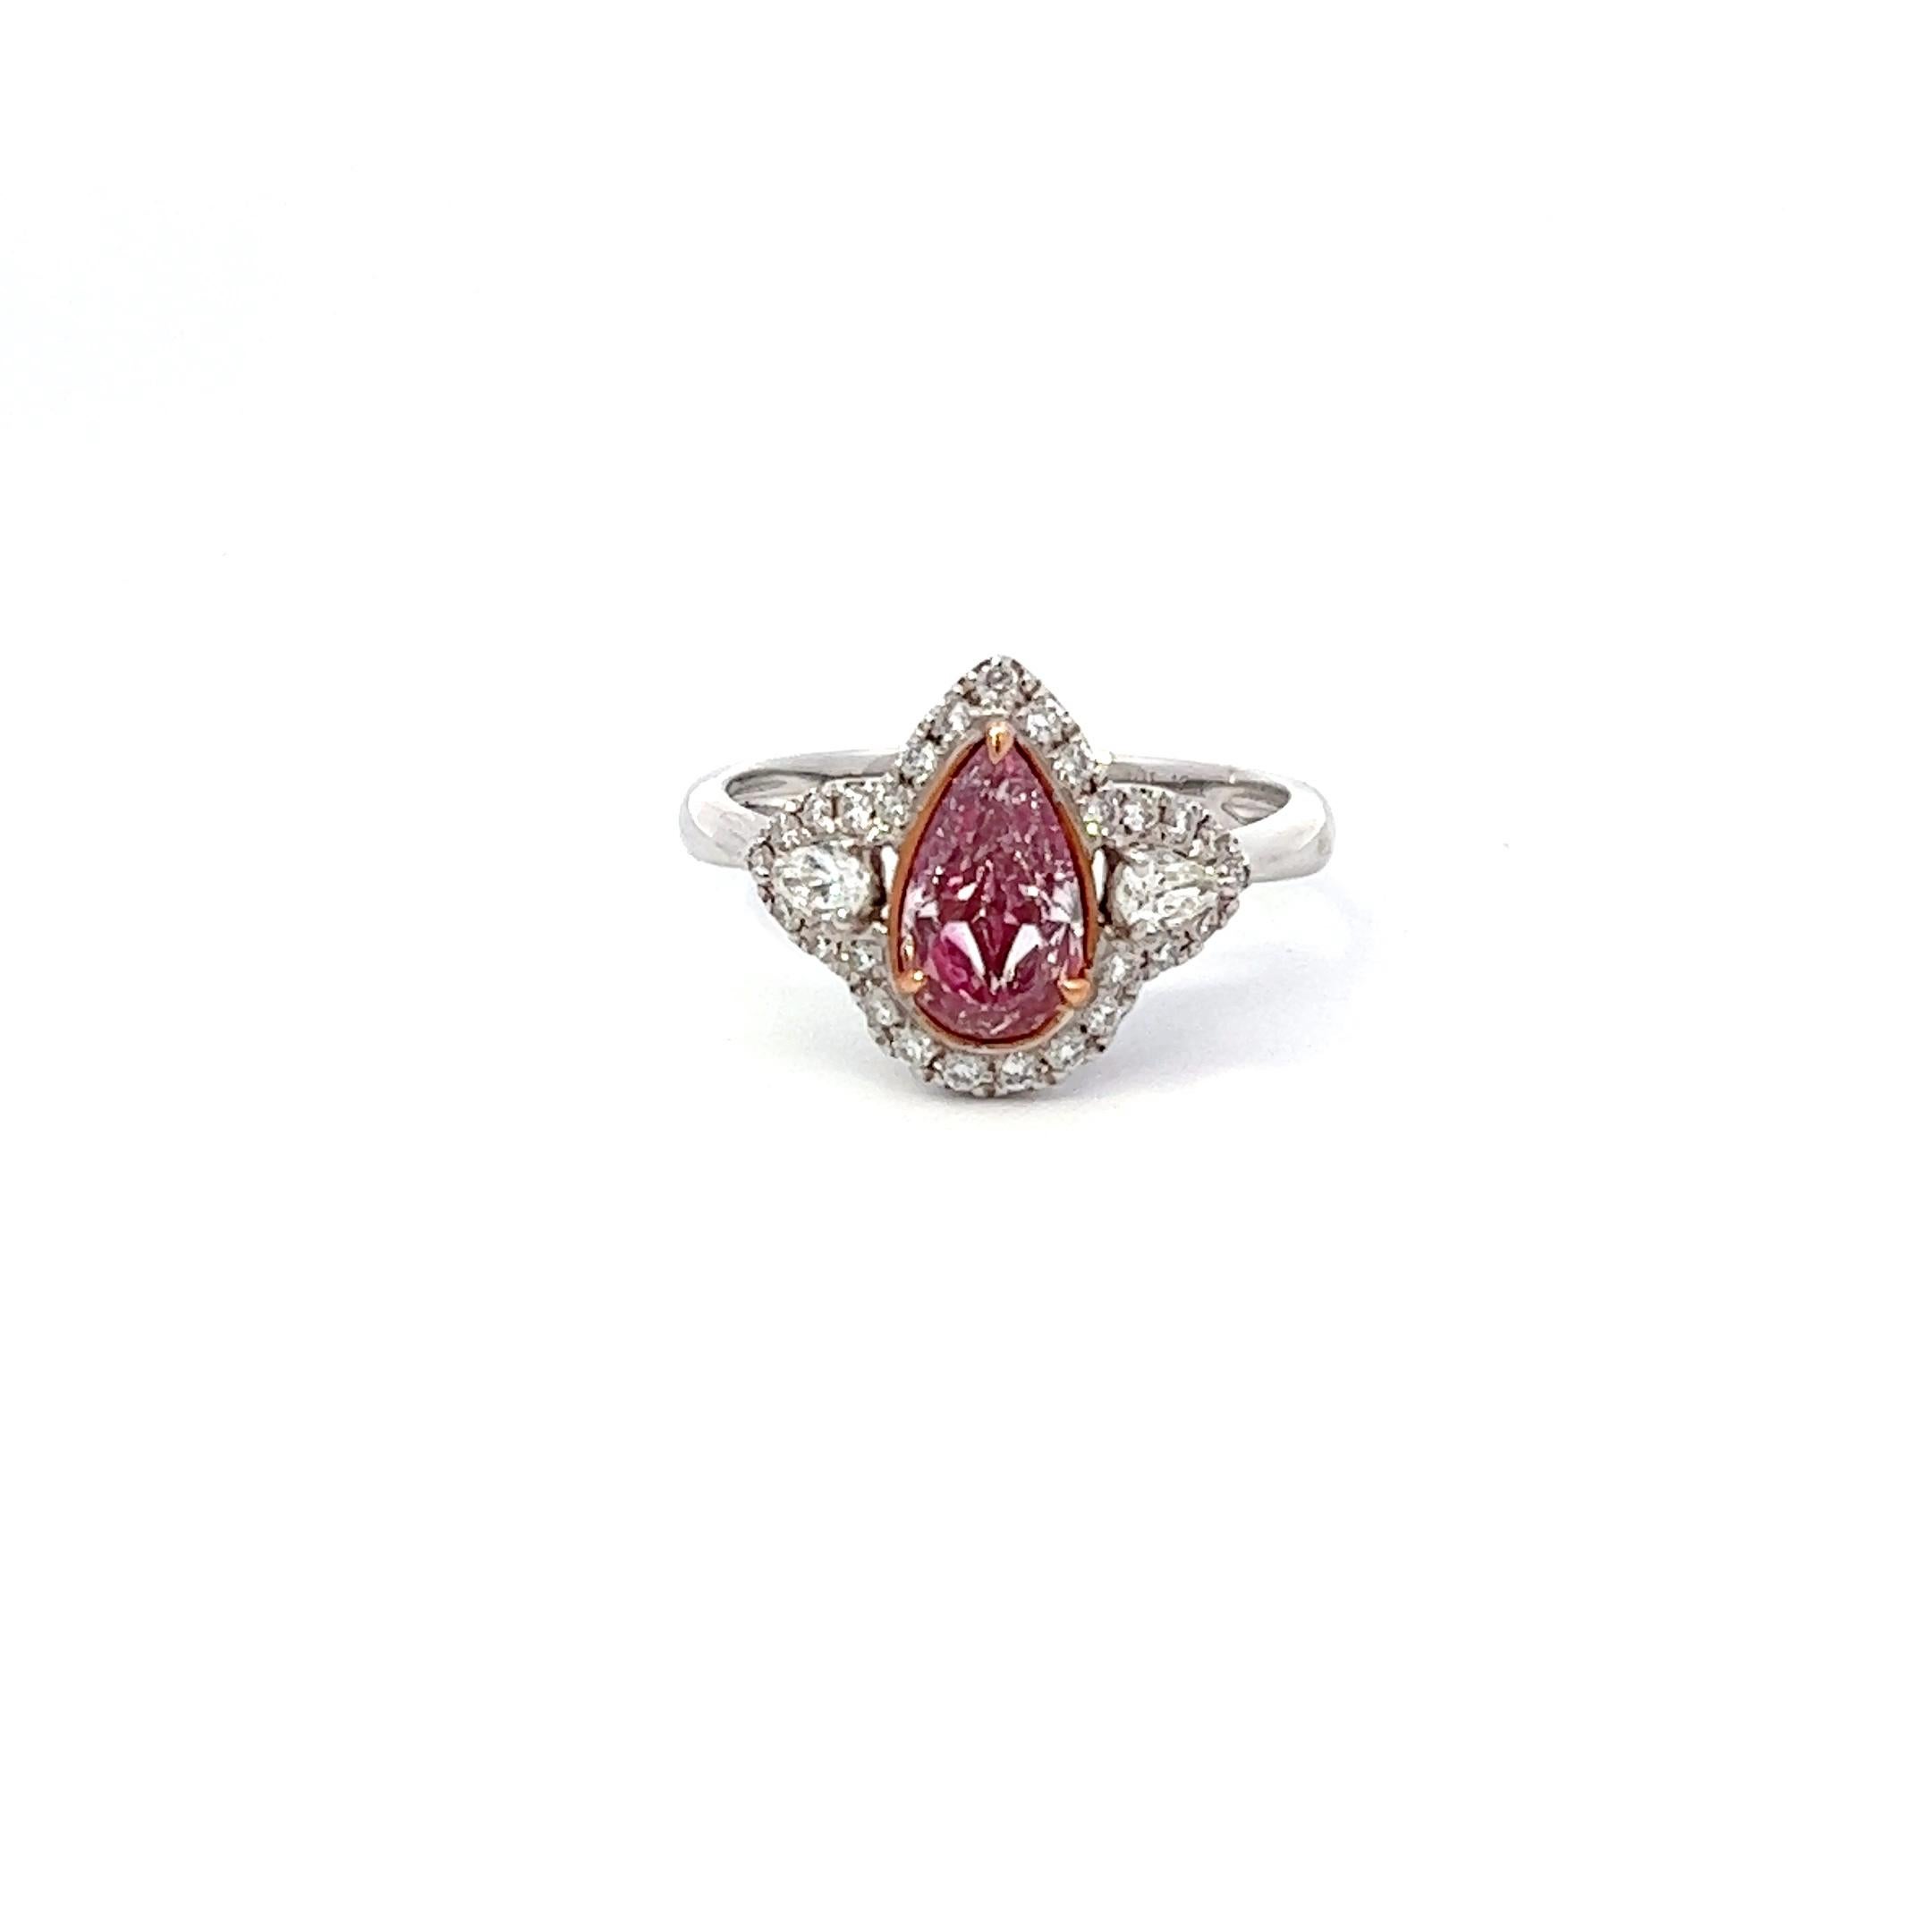 Center: Gorgeous 1.12ct Fancy Brownish Pink Pear SI1 GIA #2316720693 
Setting: 18K White Gold with 0.33ctw of Pink & White Accent Diamonds. 

Ring is currently size 6.5, can be resized for free. 

An extremely rare and stunning natural pink diamond